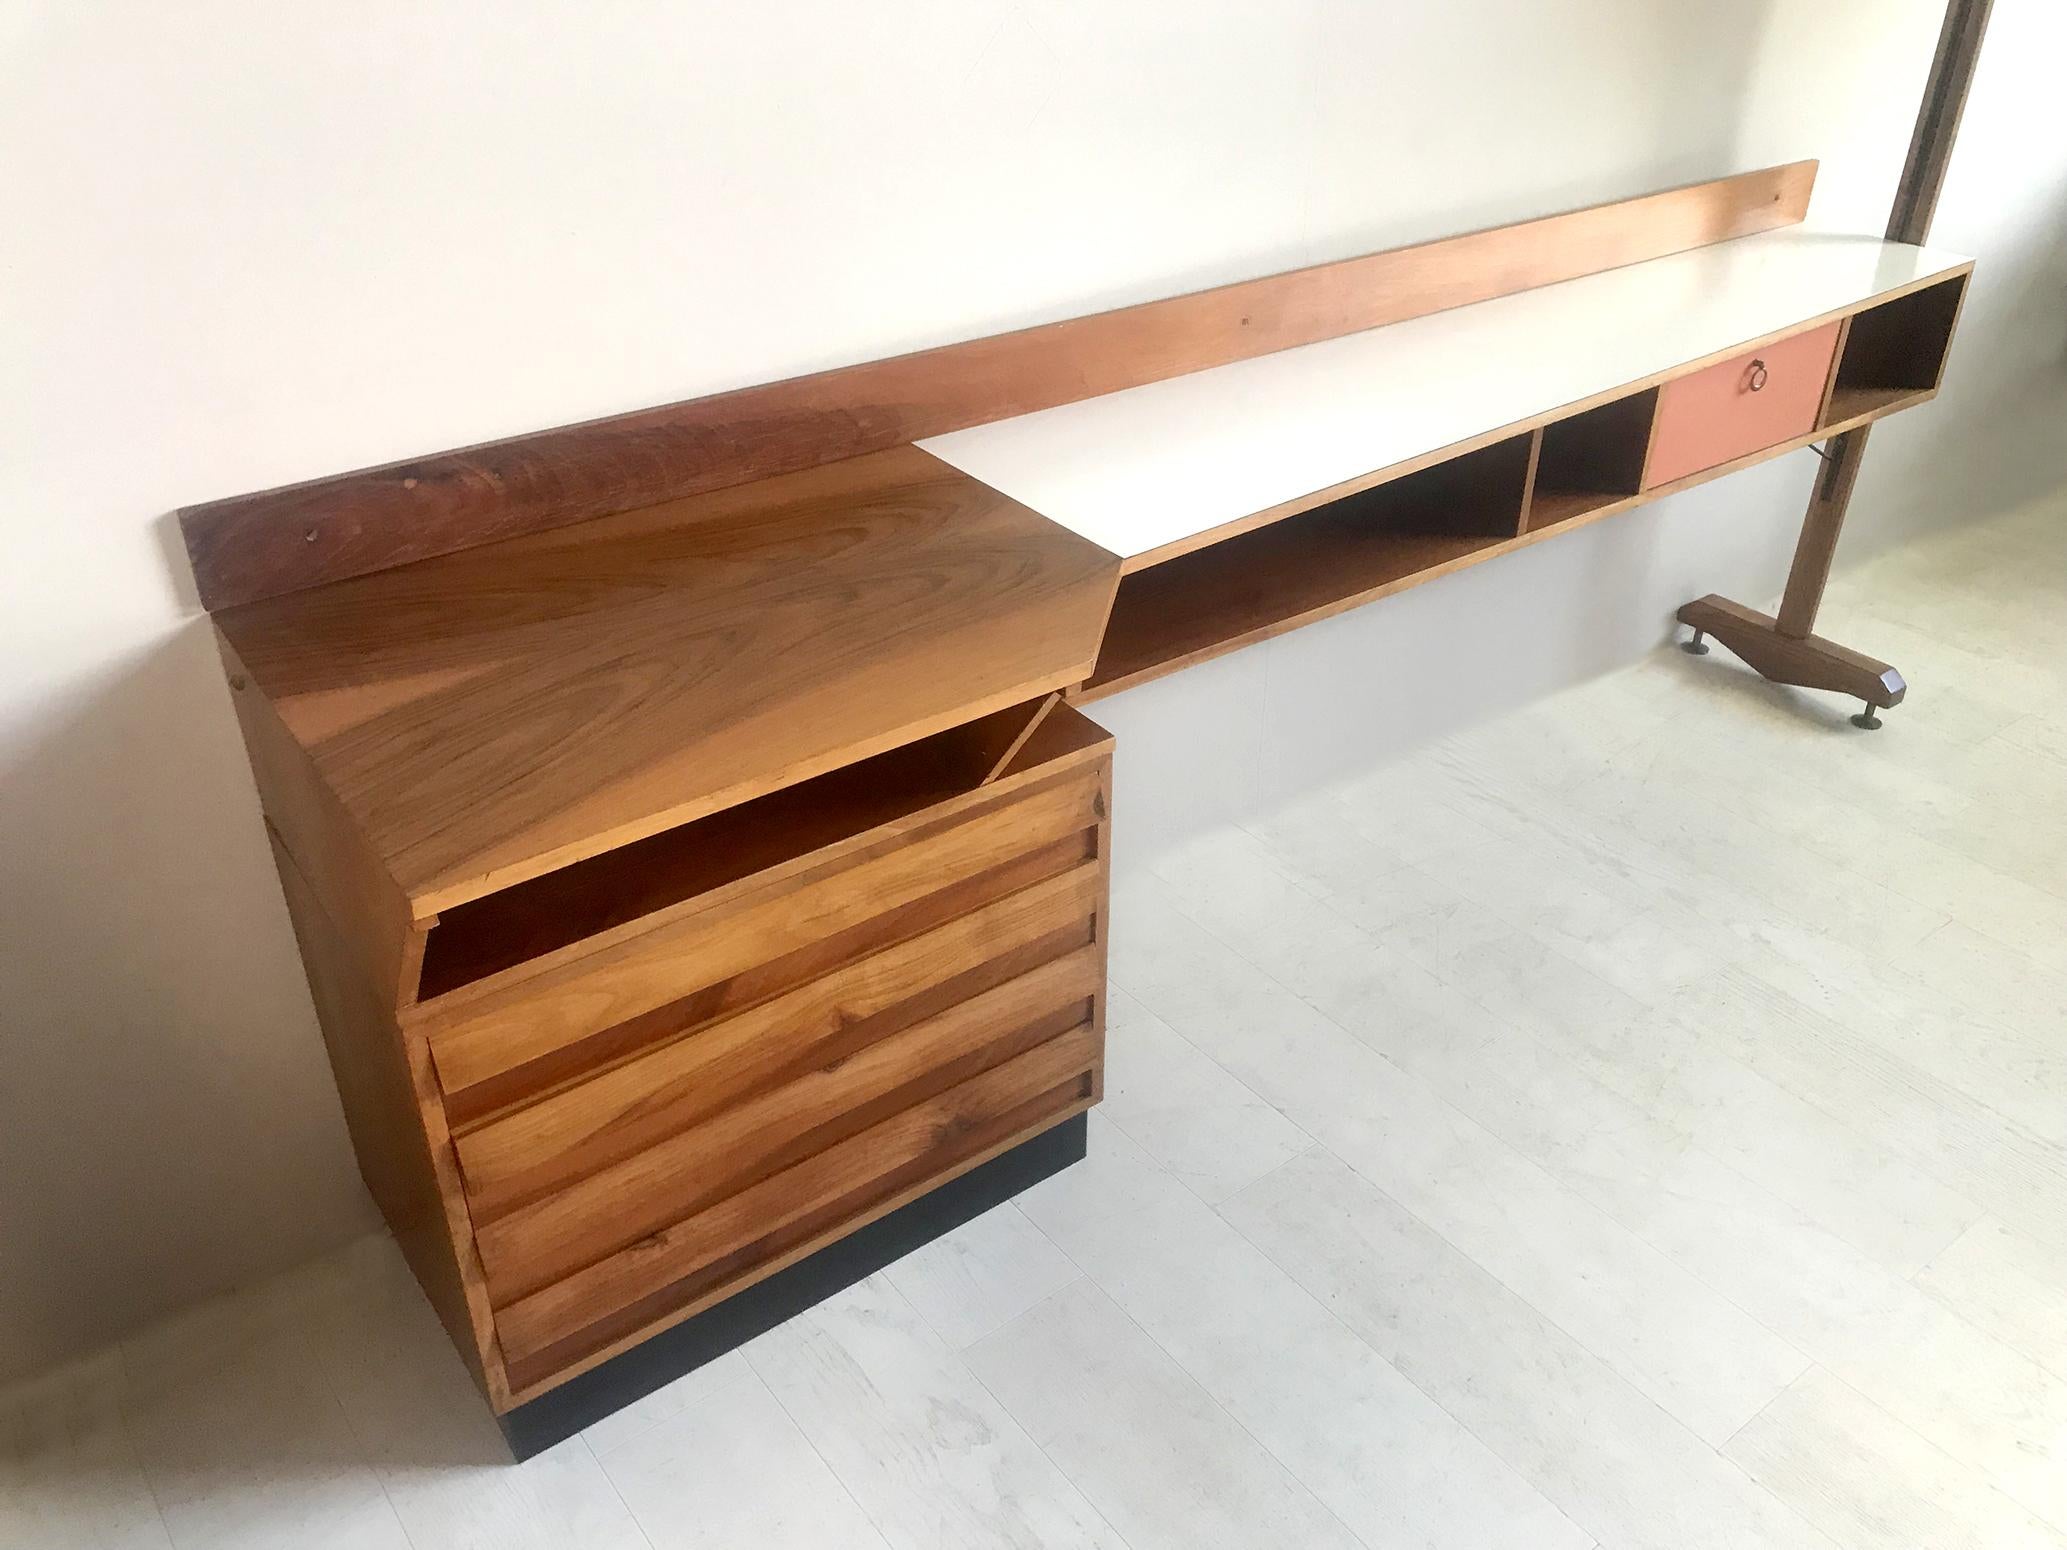 Large wall console in walnut and white and pink Formica. This furniture, designed for a hotel in Ventimiglia in 1955, adopts the codes of post-war Italian modernism, elegance of form and colors, use of materials such as formica, blond walnut and